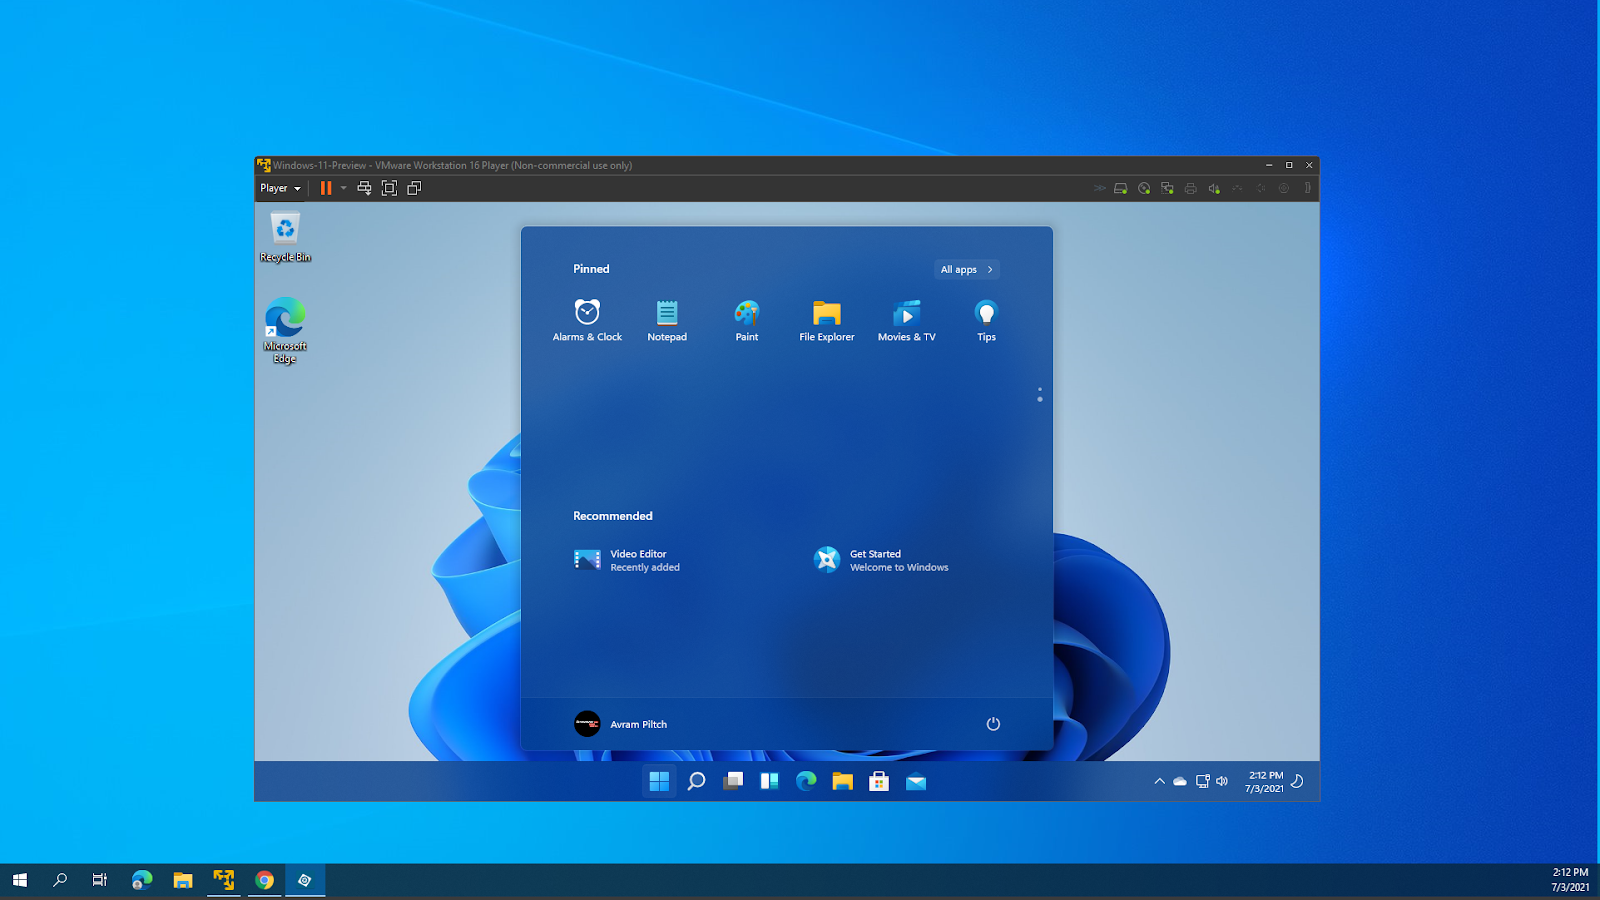 Setting up a virtual machine is one of the most notable features of Windows 11 Pro